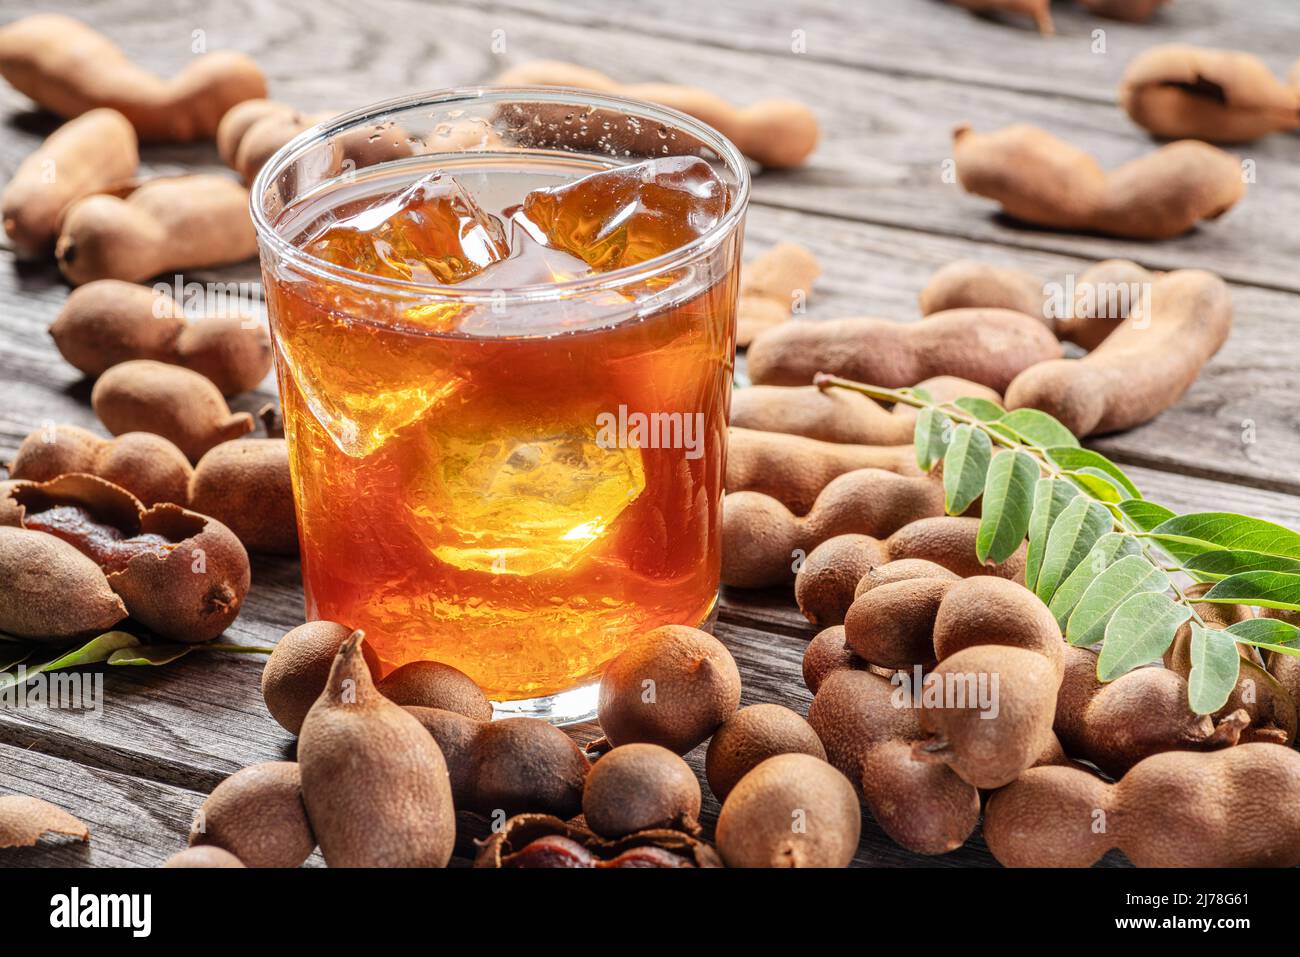 Glass of cool refreshing tamarind drink and some tamarind fruit on wooden table. Stock Photo